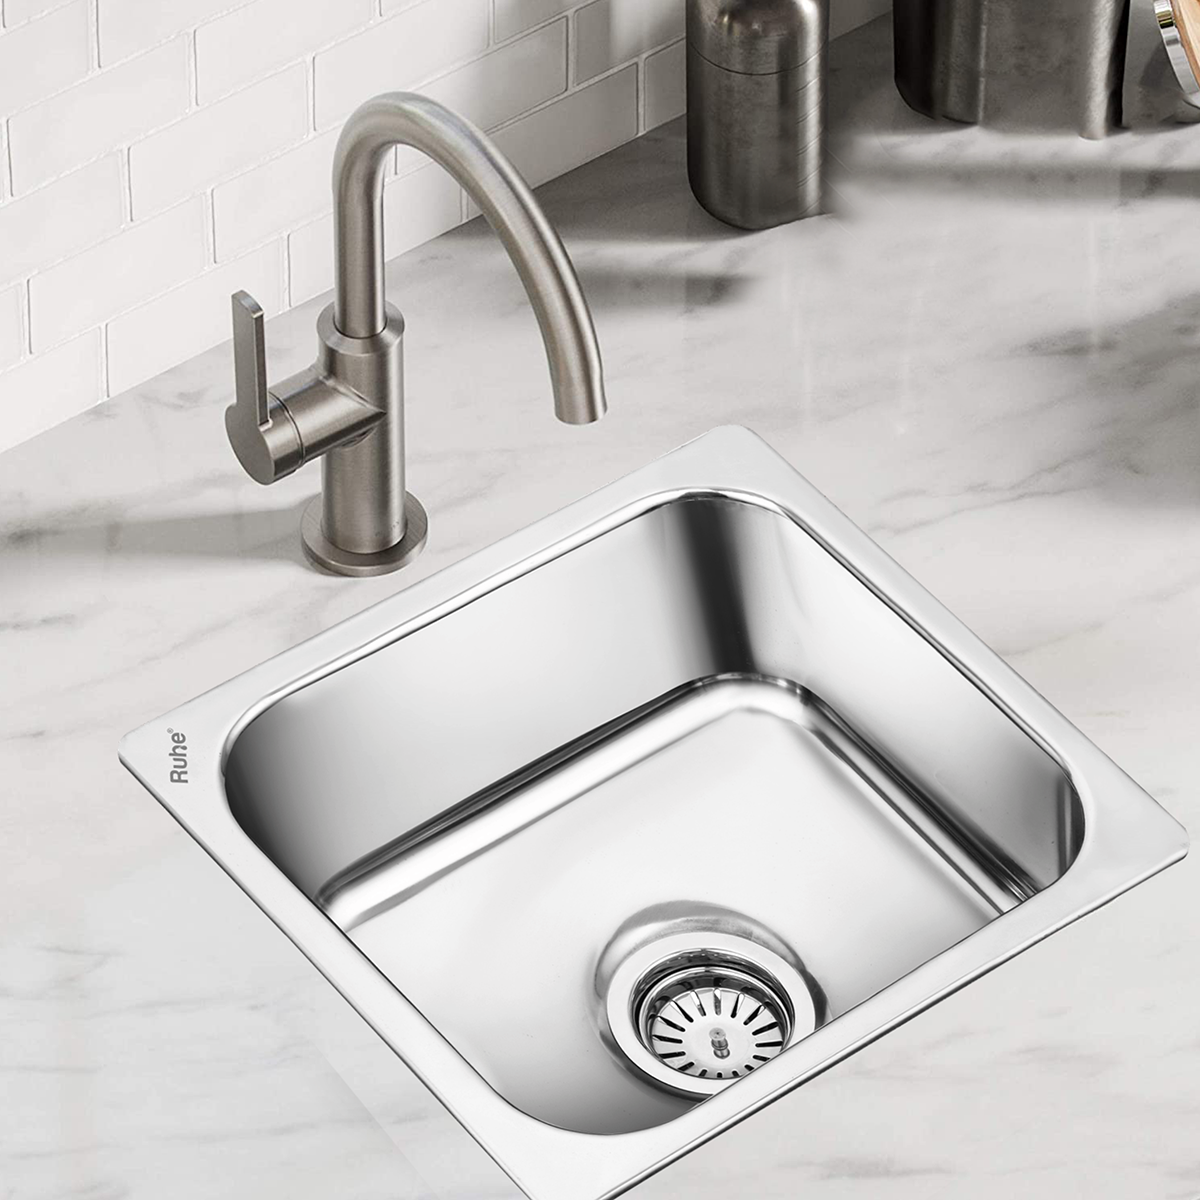 Square Single Bowl Kitchen Sink (20 x 17 x 8 inches) installed